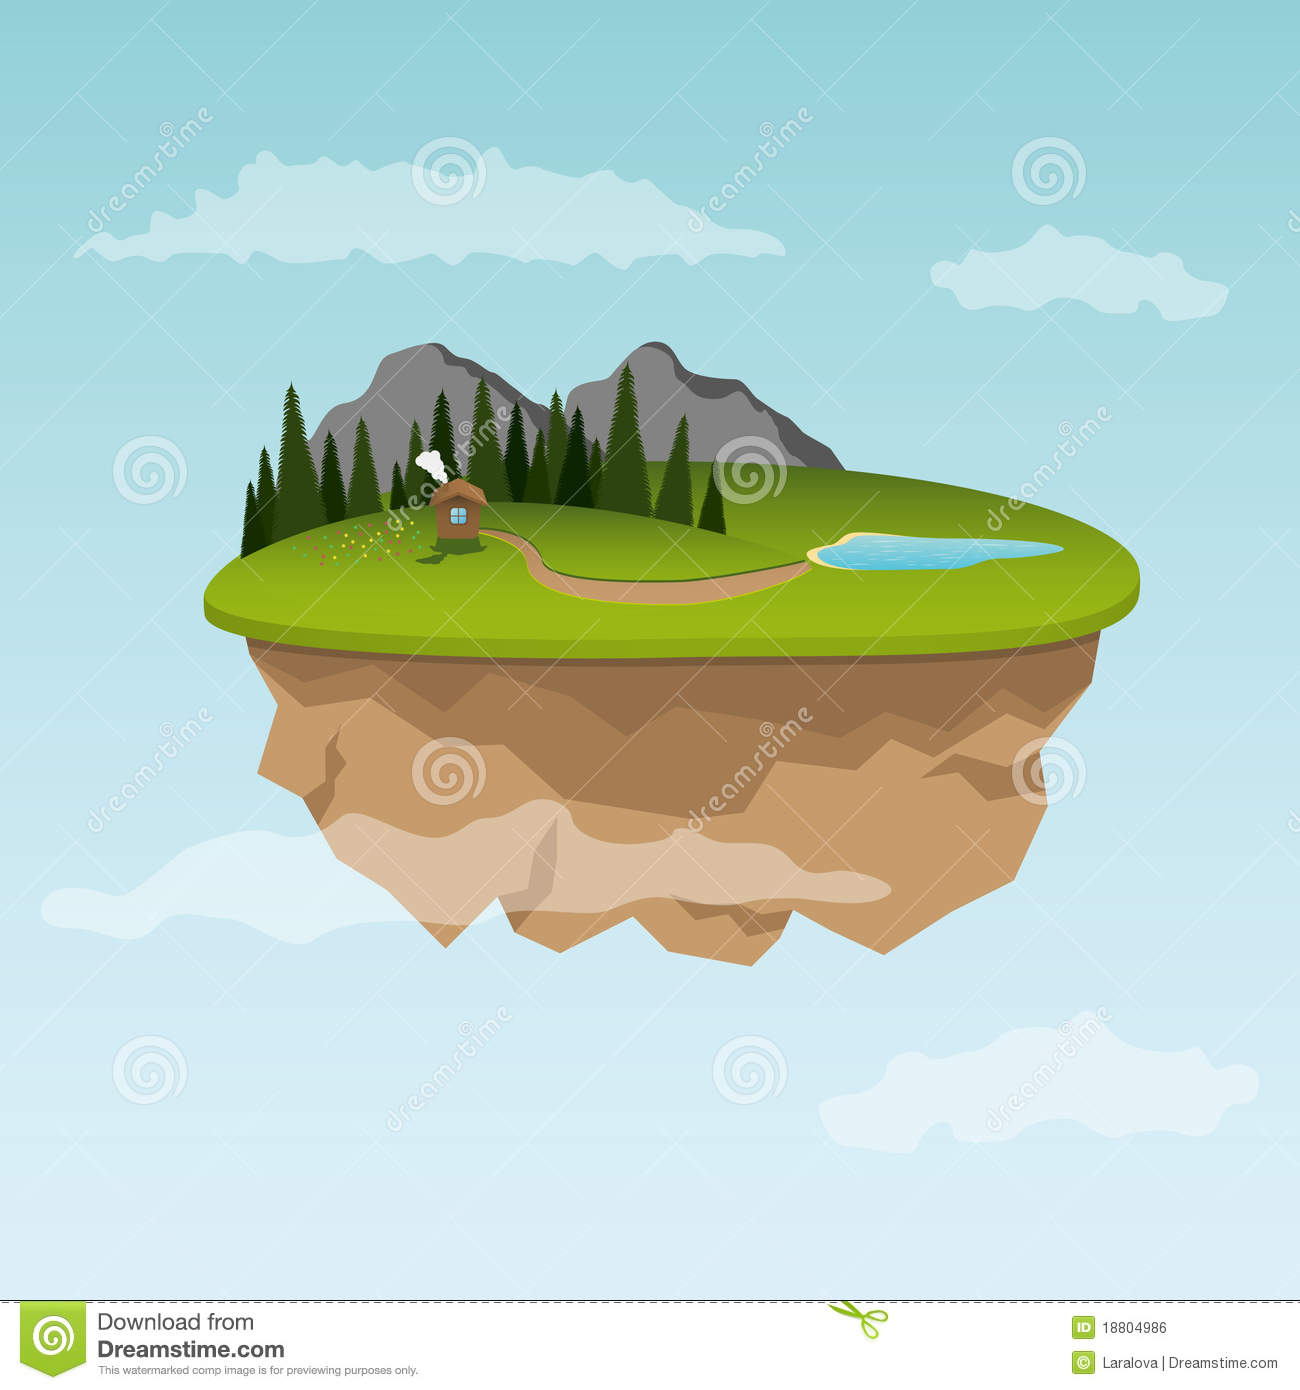 Floating Island clipart #18, Download drawings